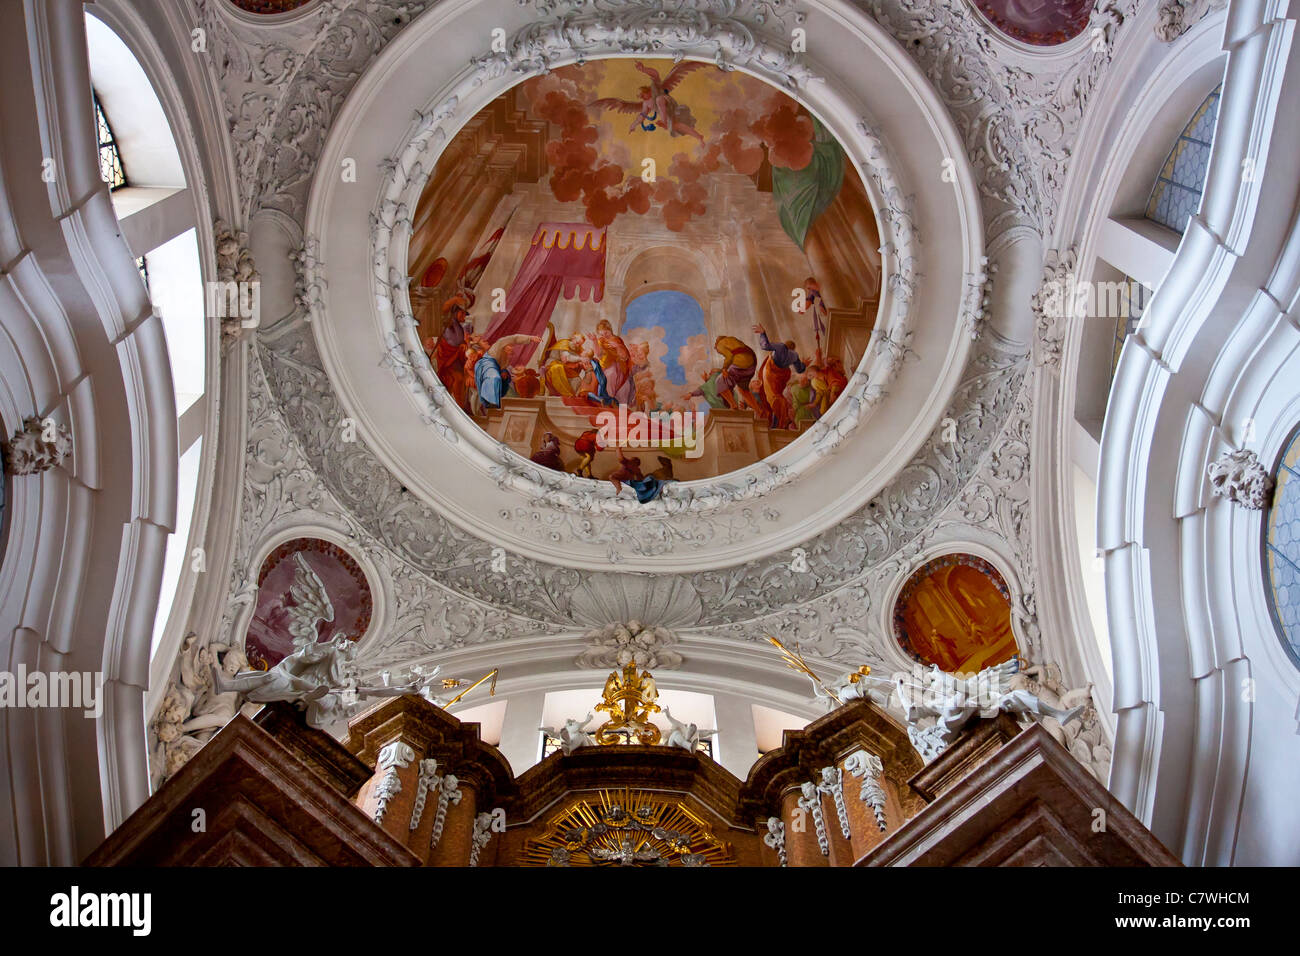 Baroque style ceiling design in church of St. Mang, Fussen Bavaria Germany Stock Photo